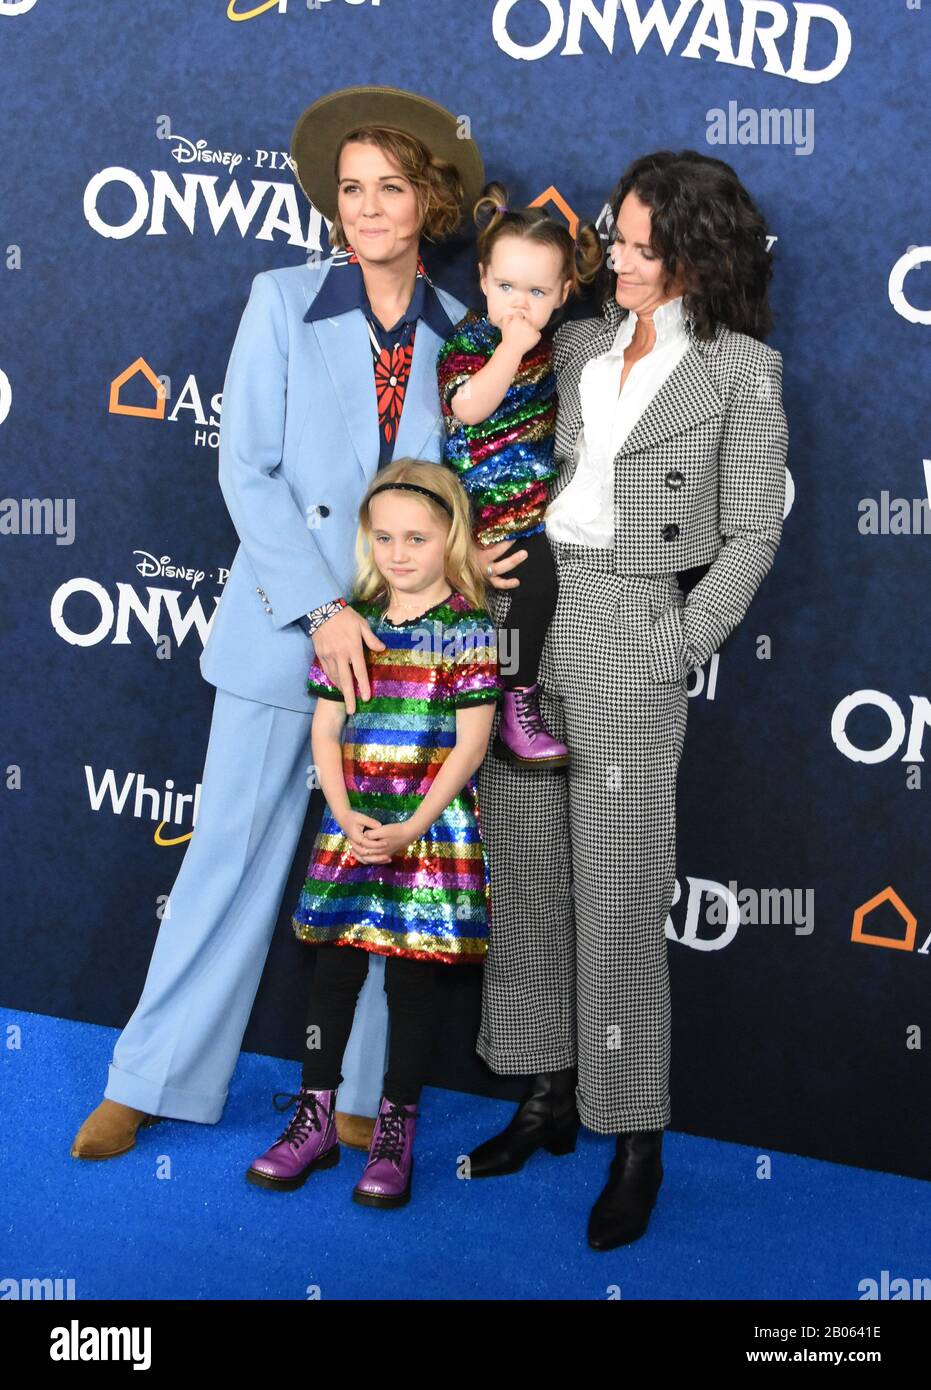 Hollywood, California, USA 18th February 2020 Singer/songwriter Brandi Carlile, daughters Evangeline Ruth Carlile and Elijah Carlile and Catherine Shepherd attend Disney Pixar 'Onward' World Premiere on February 18, 2020 at the El Capitan Theatre in Hollywood, California, USA. Photo by Barry King/Alamy Live News Stock Photo